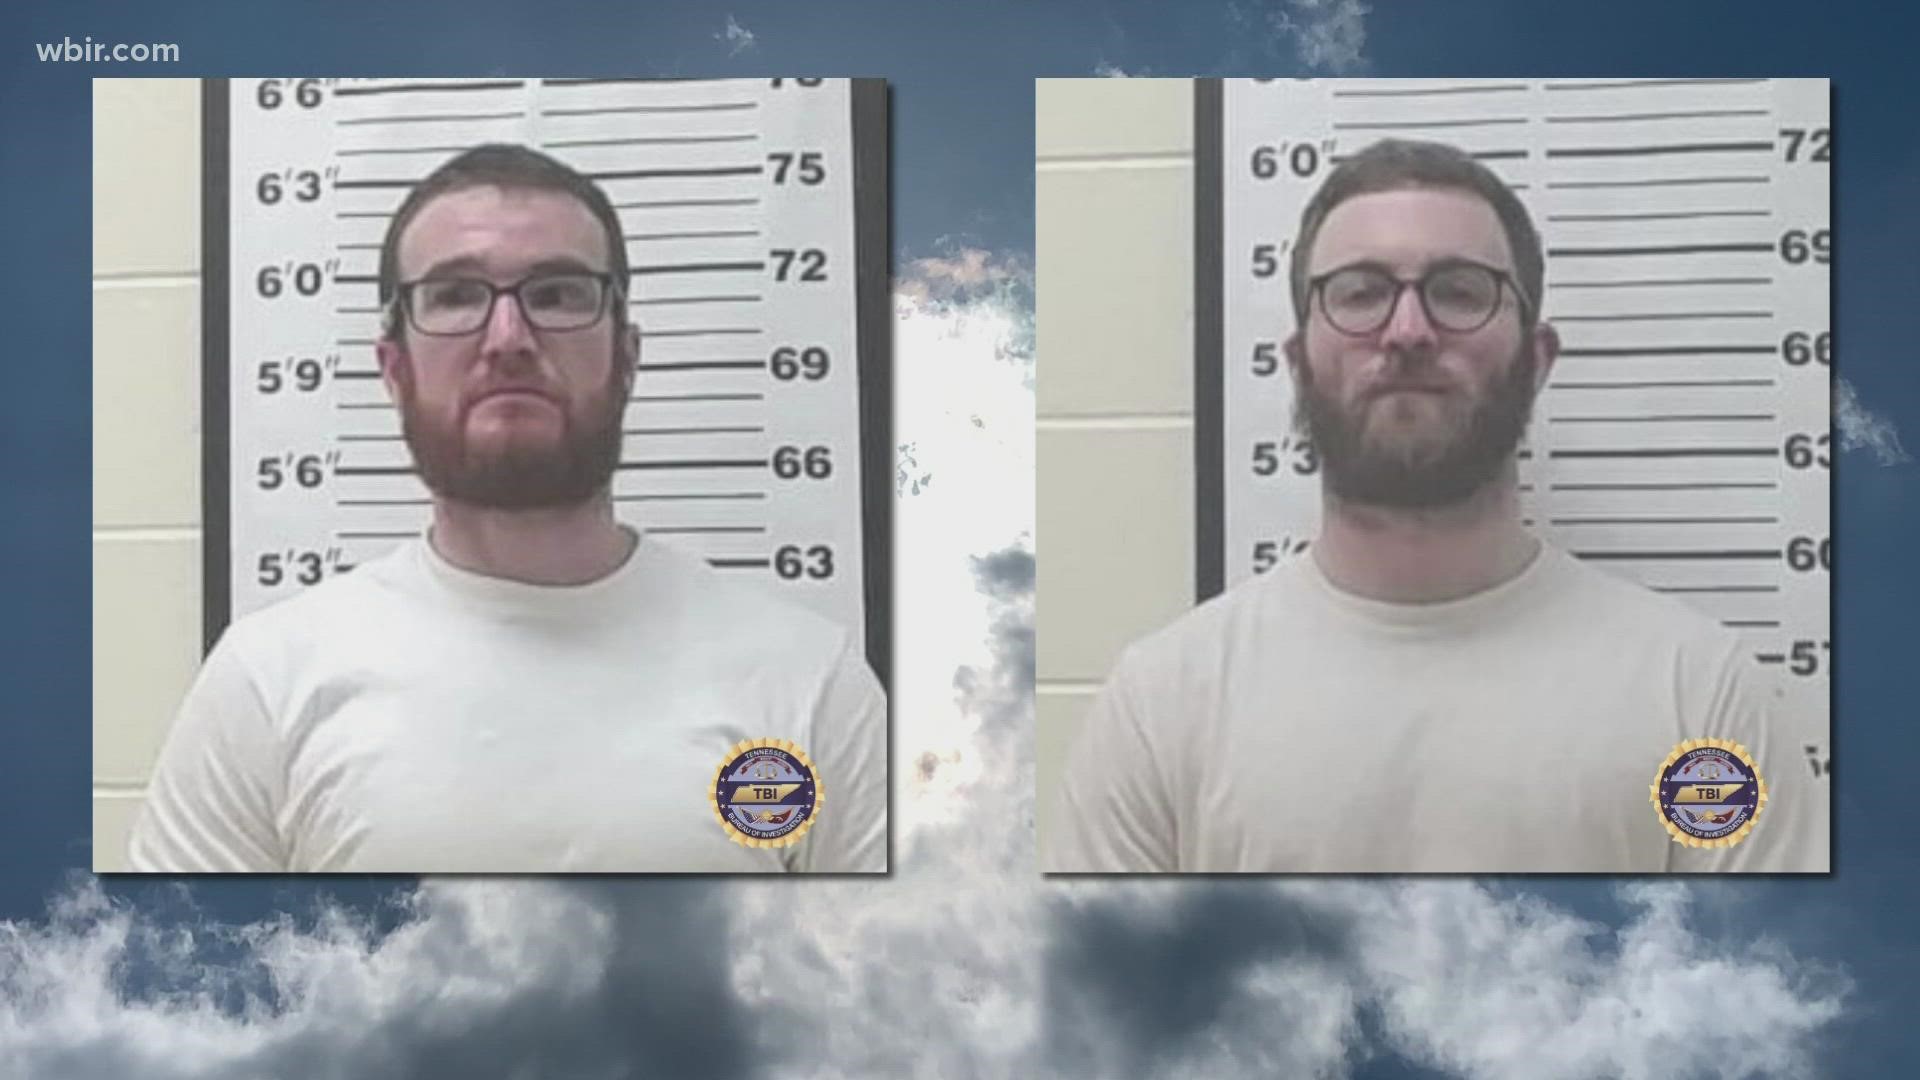 Casey Ridenour and Charles Kennedy strategized every detail of their escape from the Fentress County jail. It all went out the window as soon as they started to run.